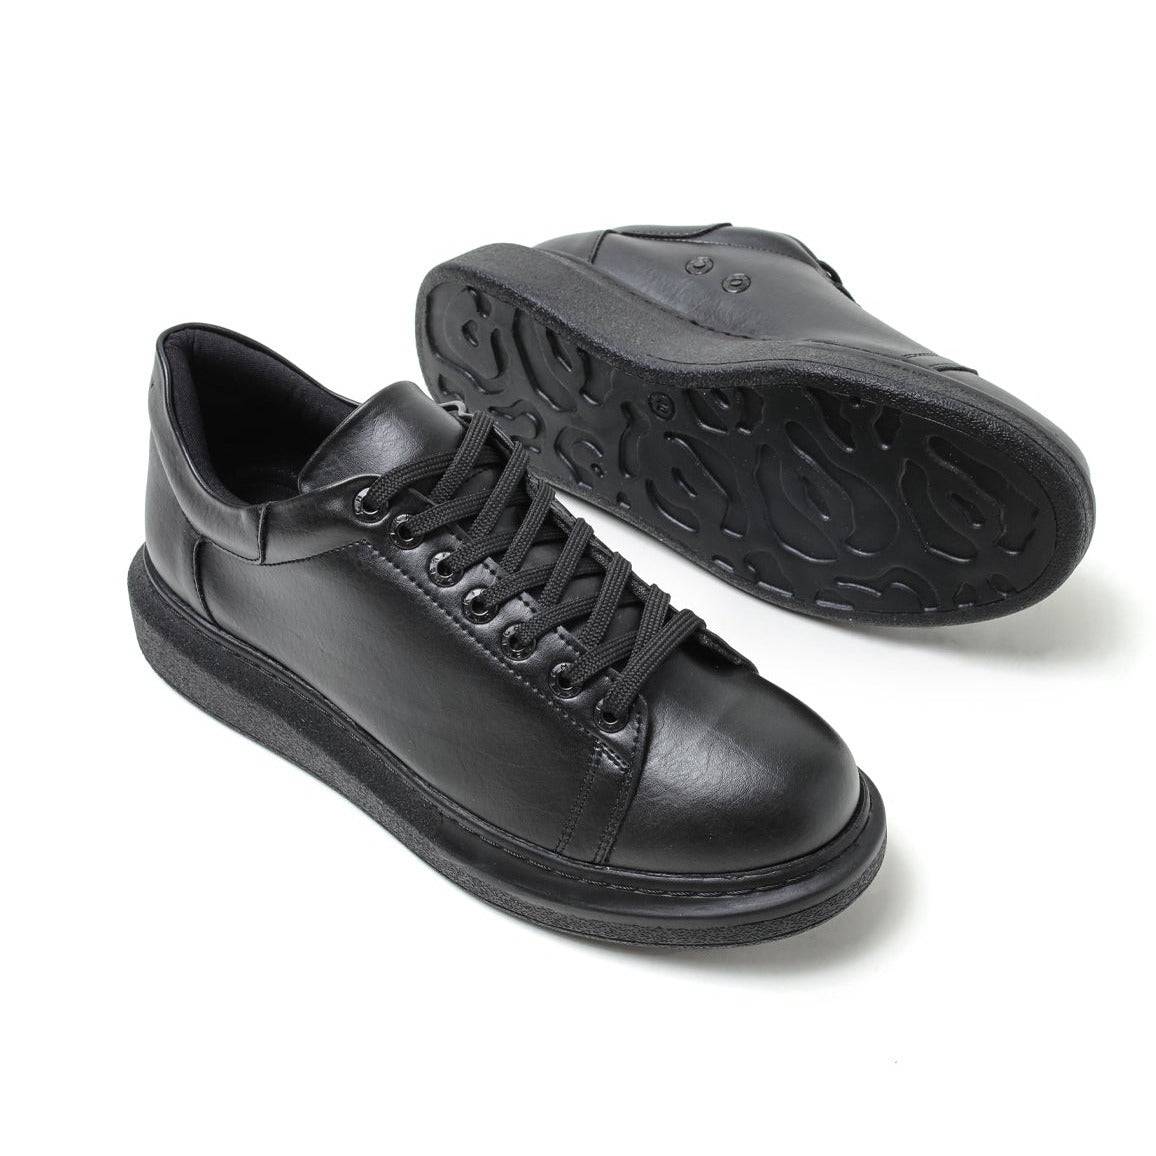 Low Top Casual Platform Sneakers for Women by Apollo | Pluto in Obsidian Black